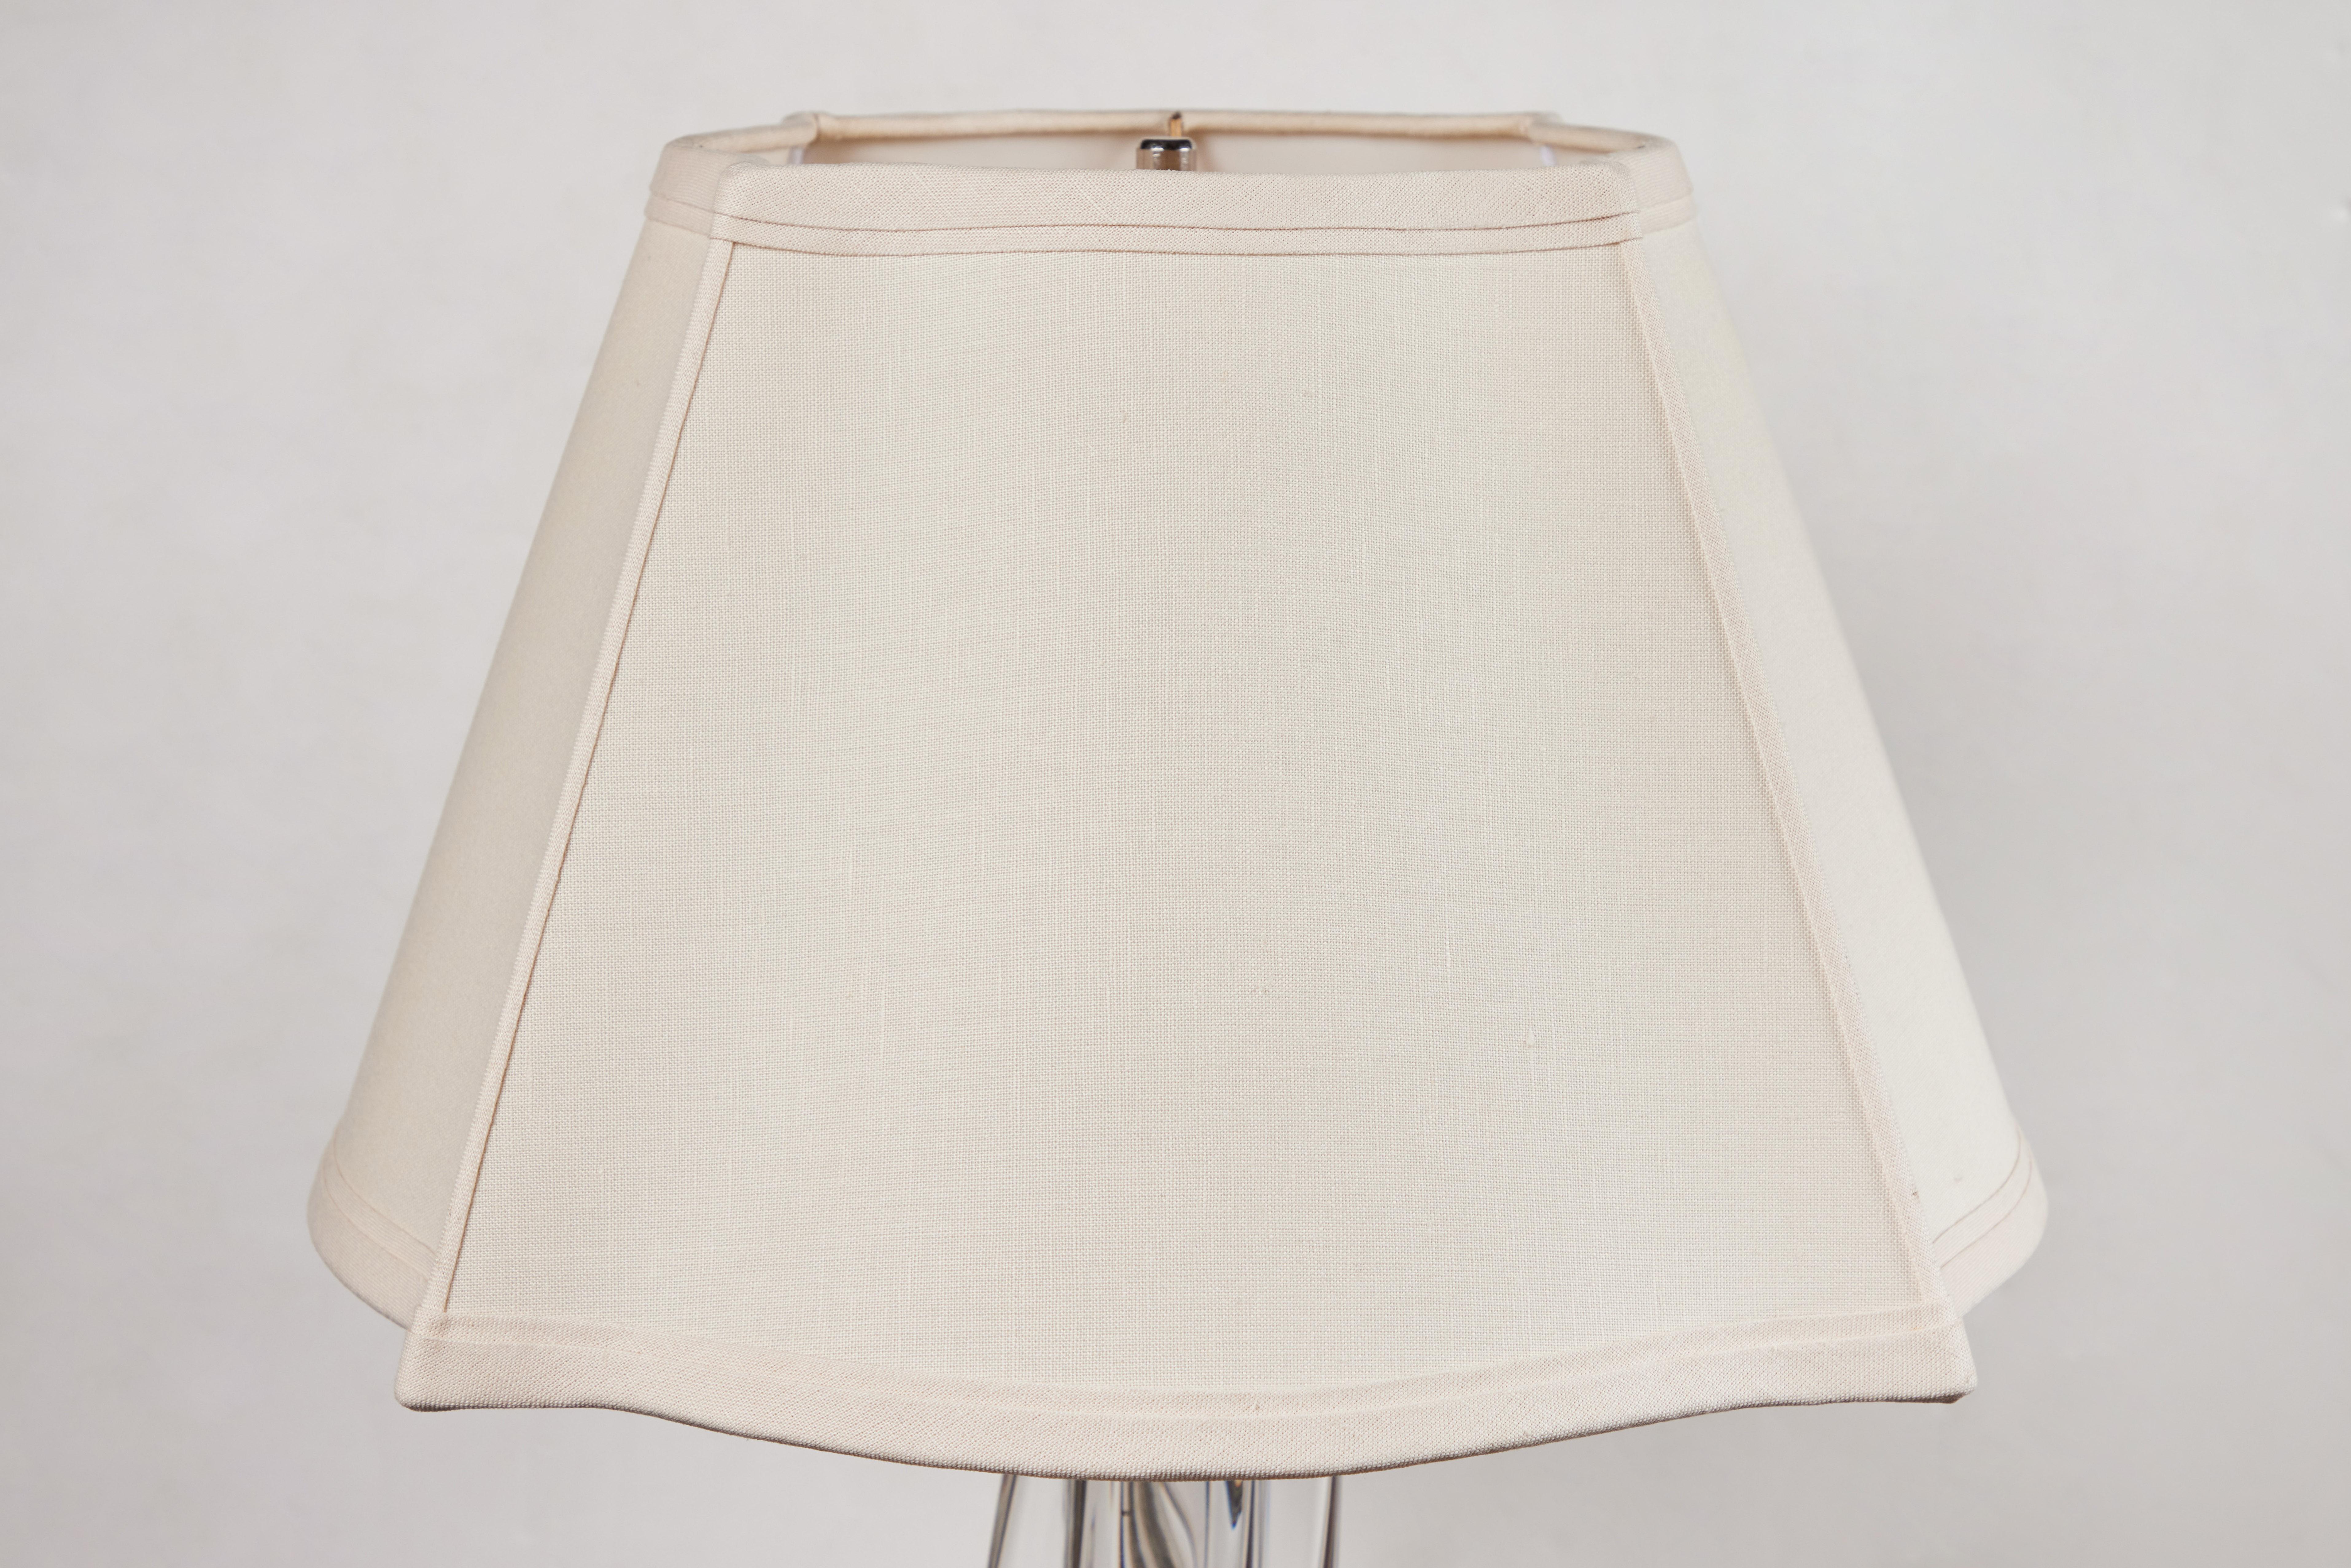 A c. 1940, Continental, organic-form, solid crystal table lamp with intertwining extrusions. Surmounted by a custom shade. Now wired for U.S. current. Measures: Shade diameter: 18.5